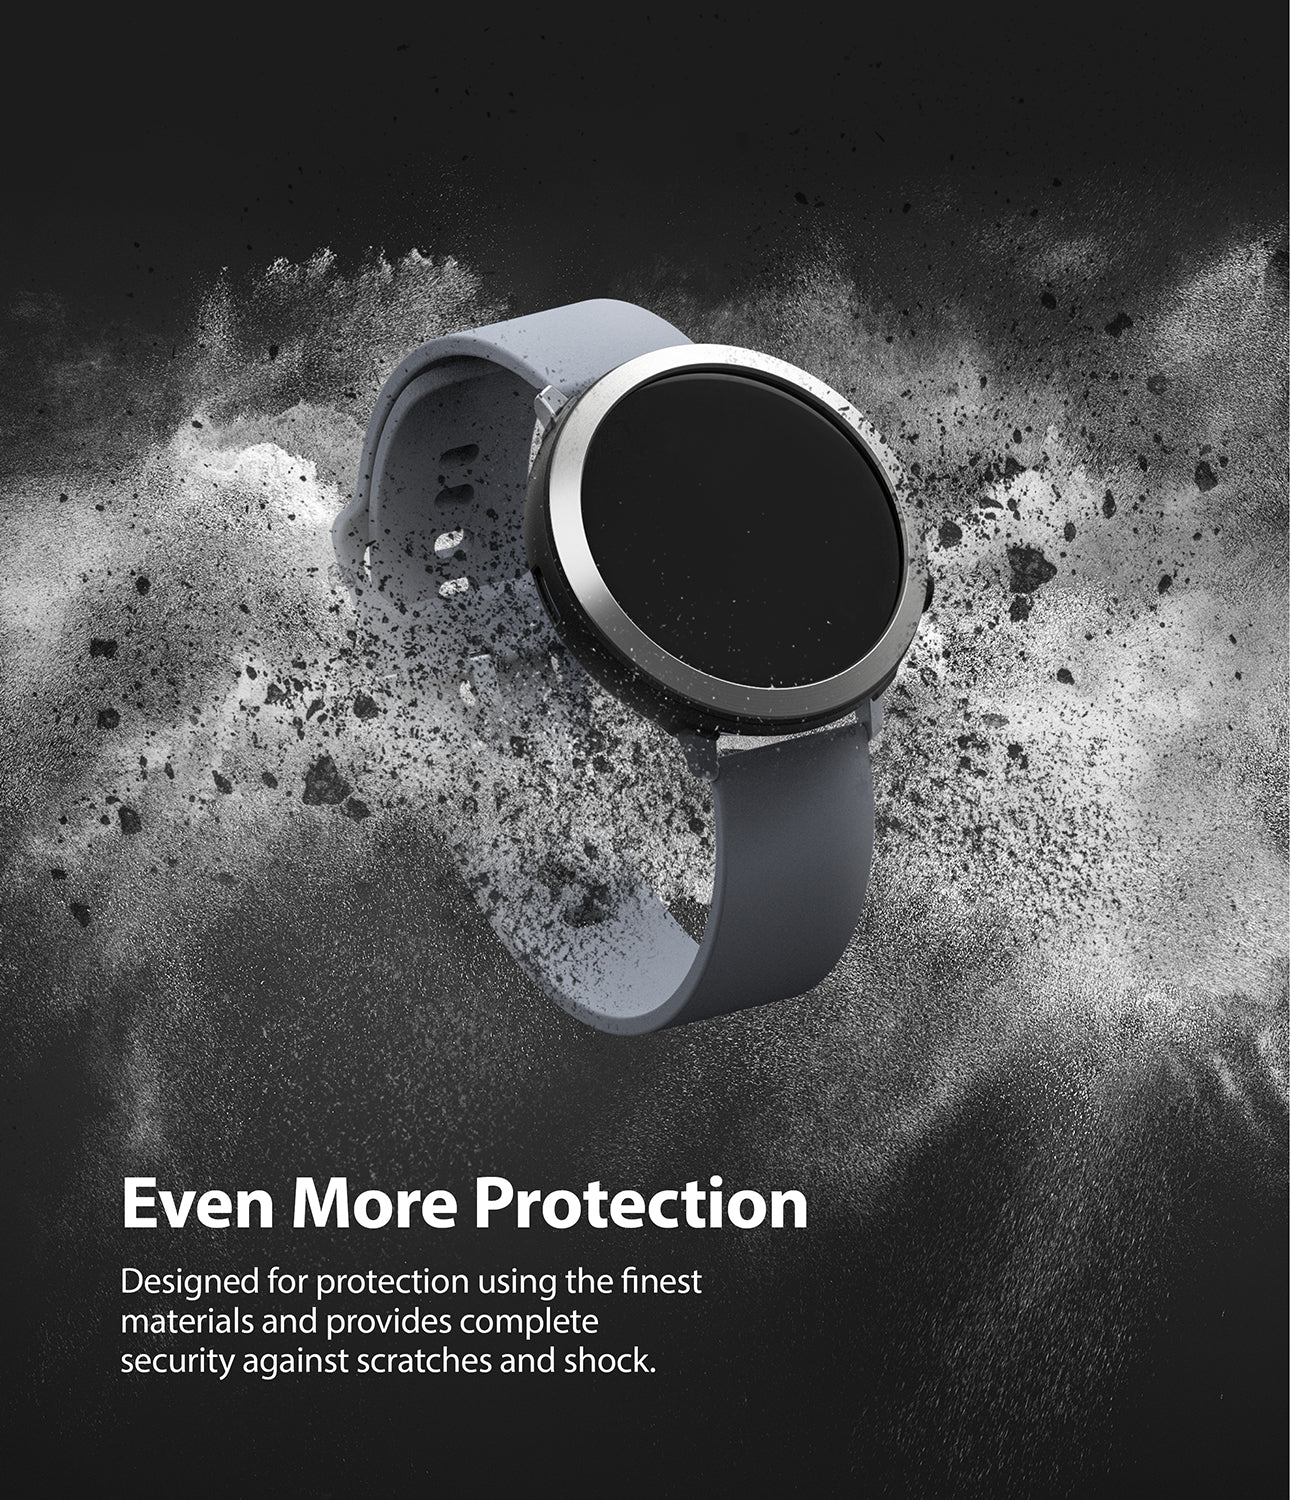 even more protection - desigend for protection using the finest materials and provides complete security against scratchtes and schock